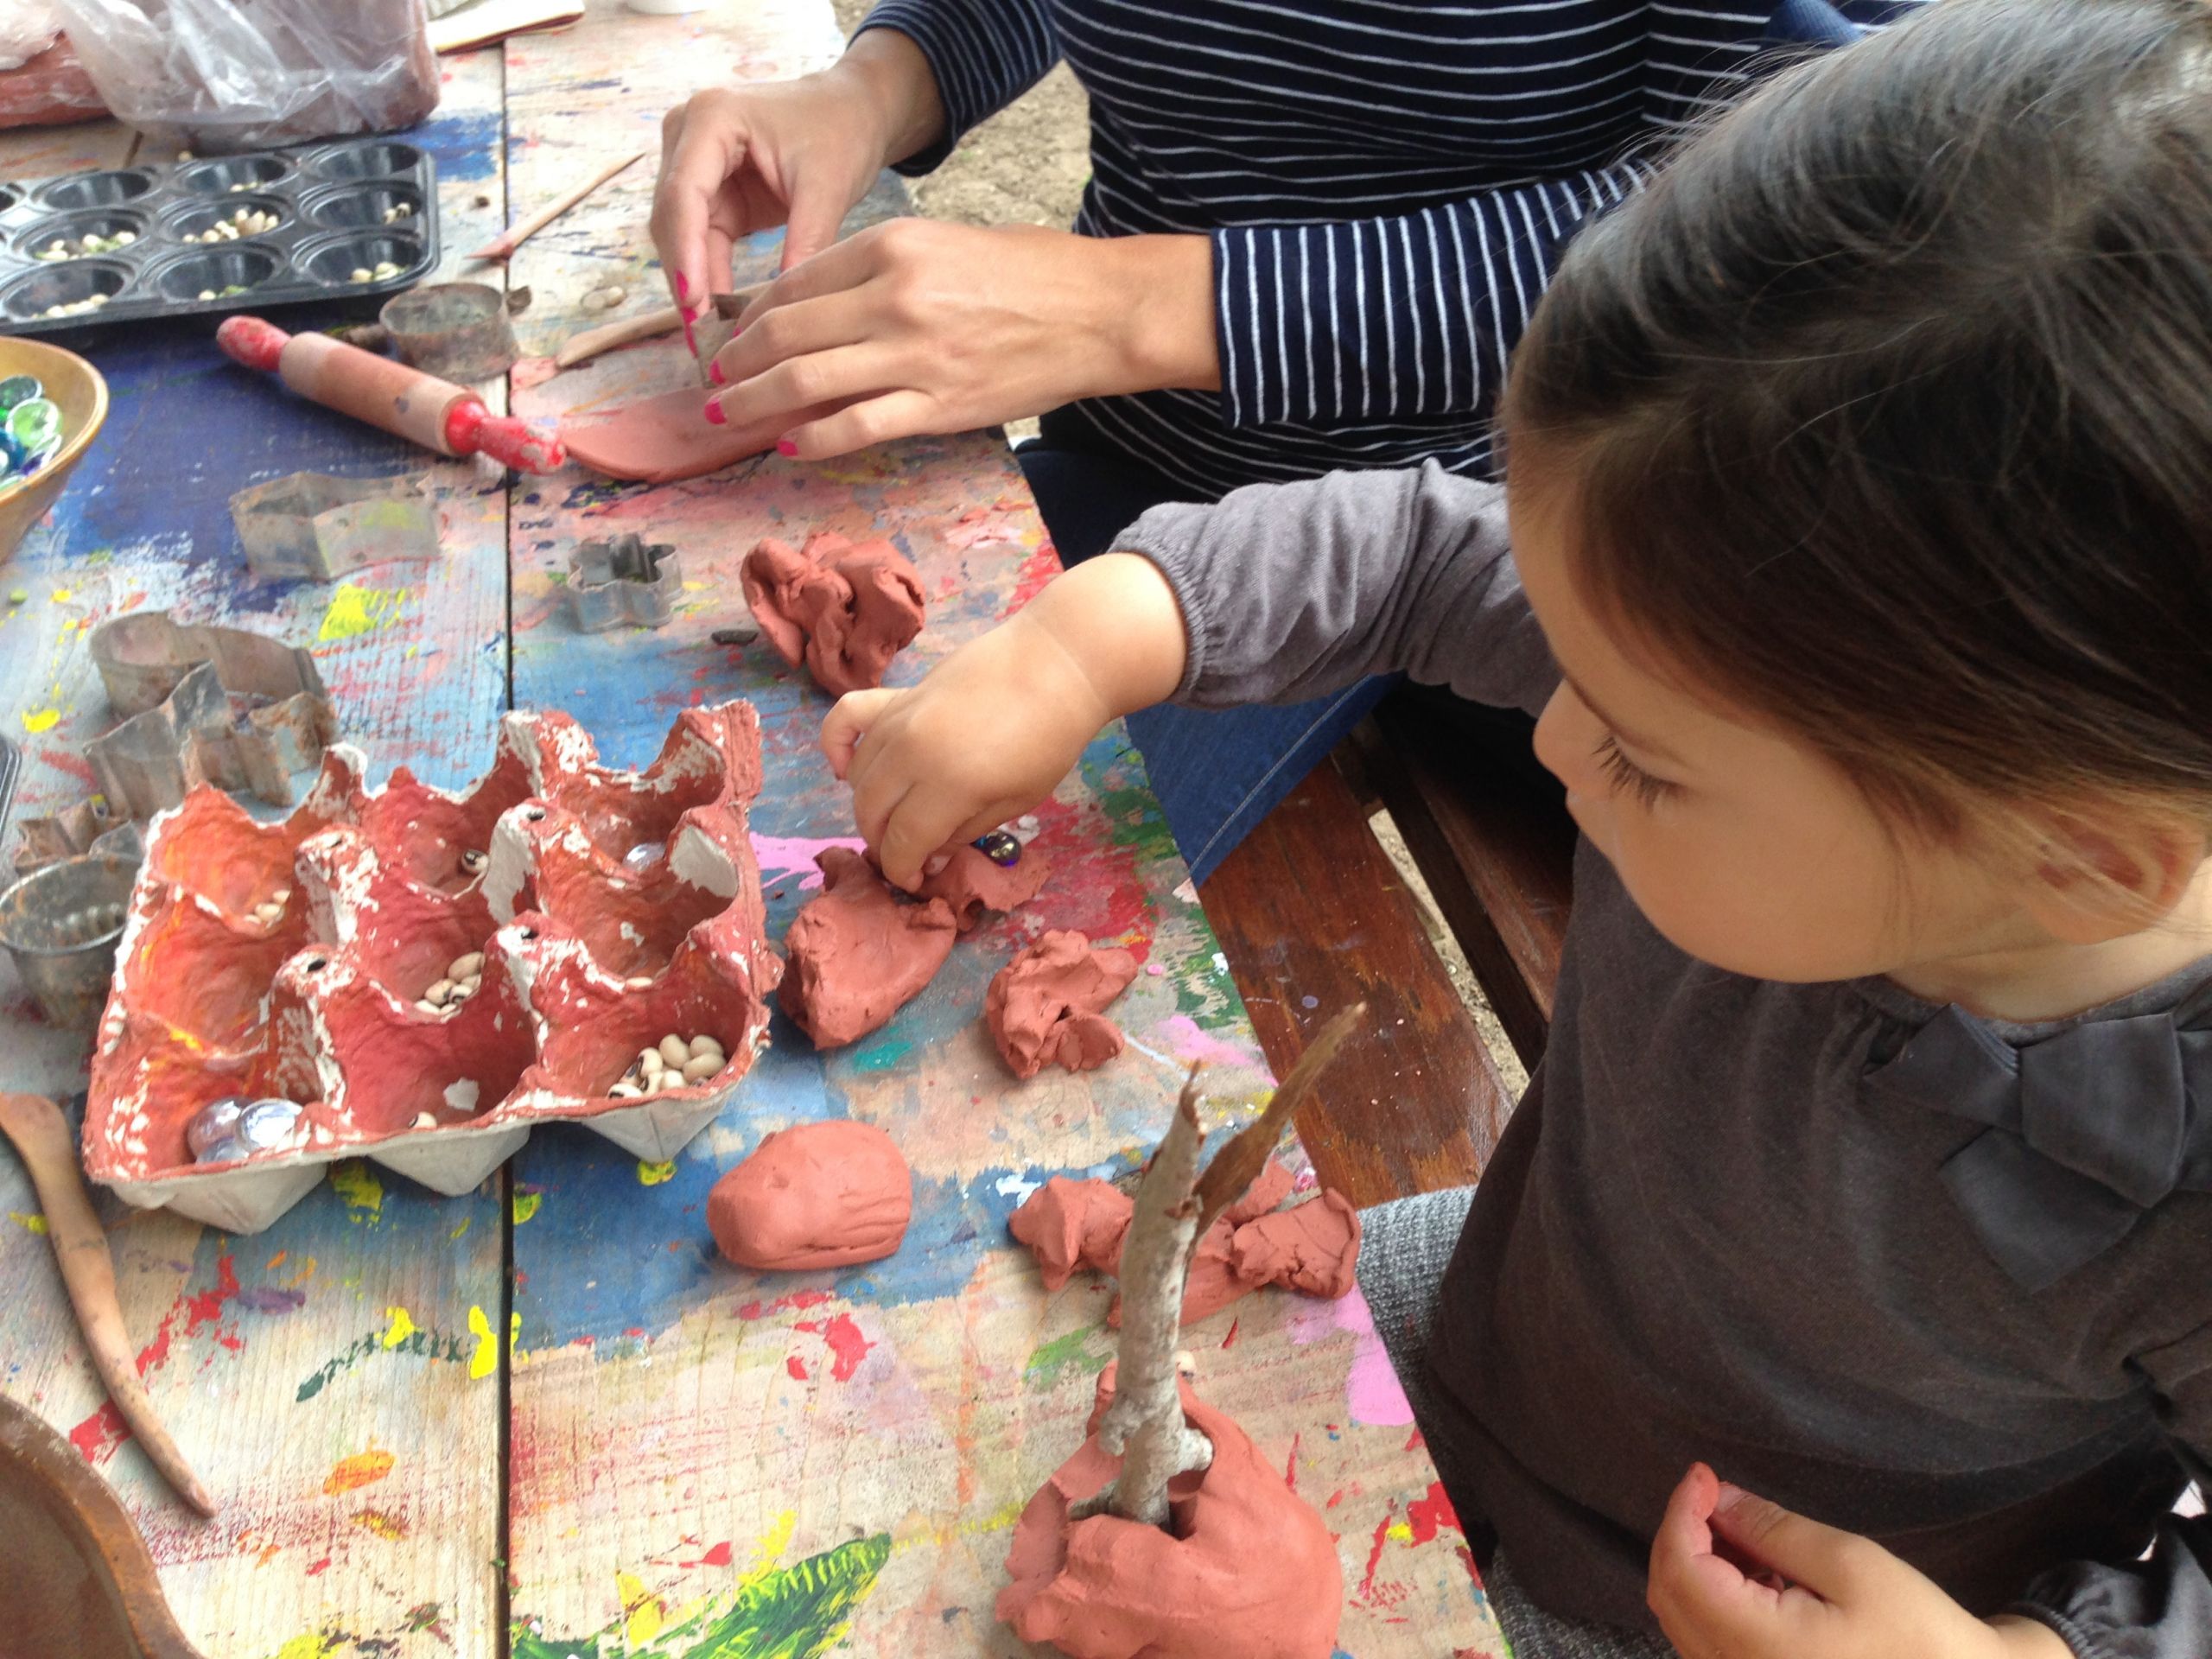 Kids Making Art
 Playing with clay can relieve stress for kids Art making